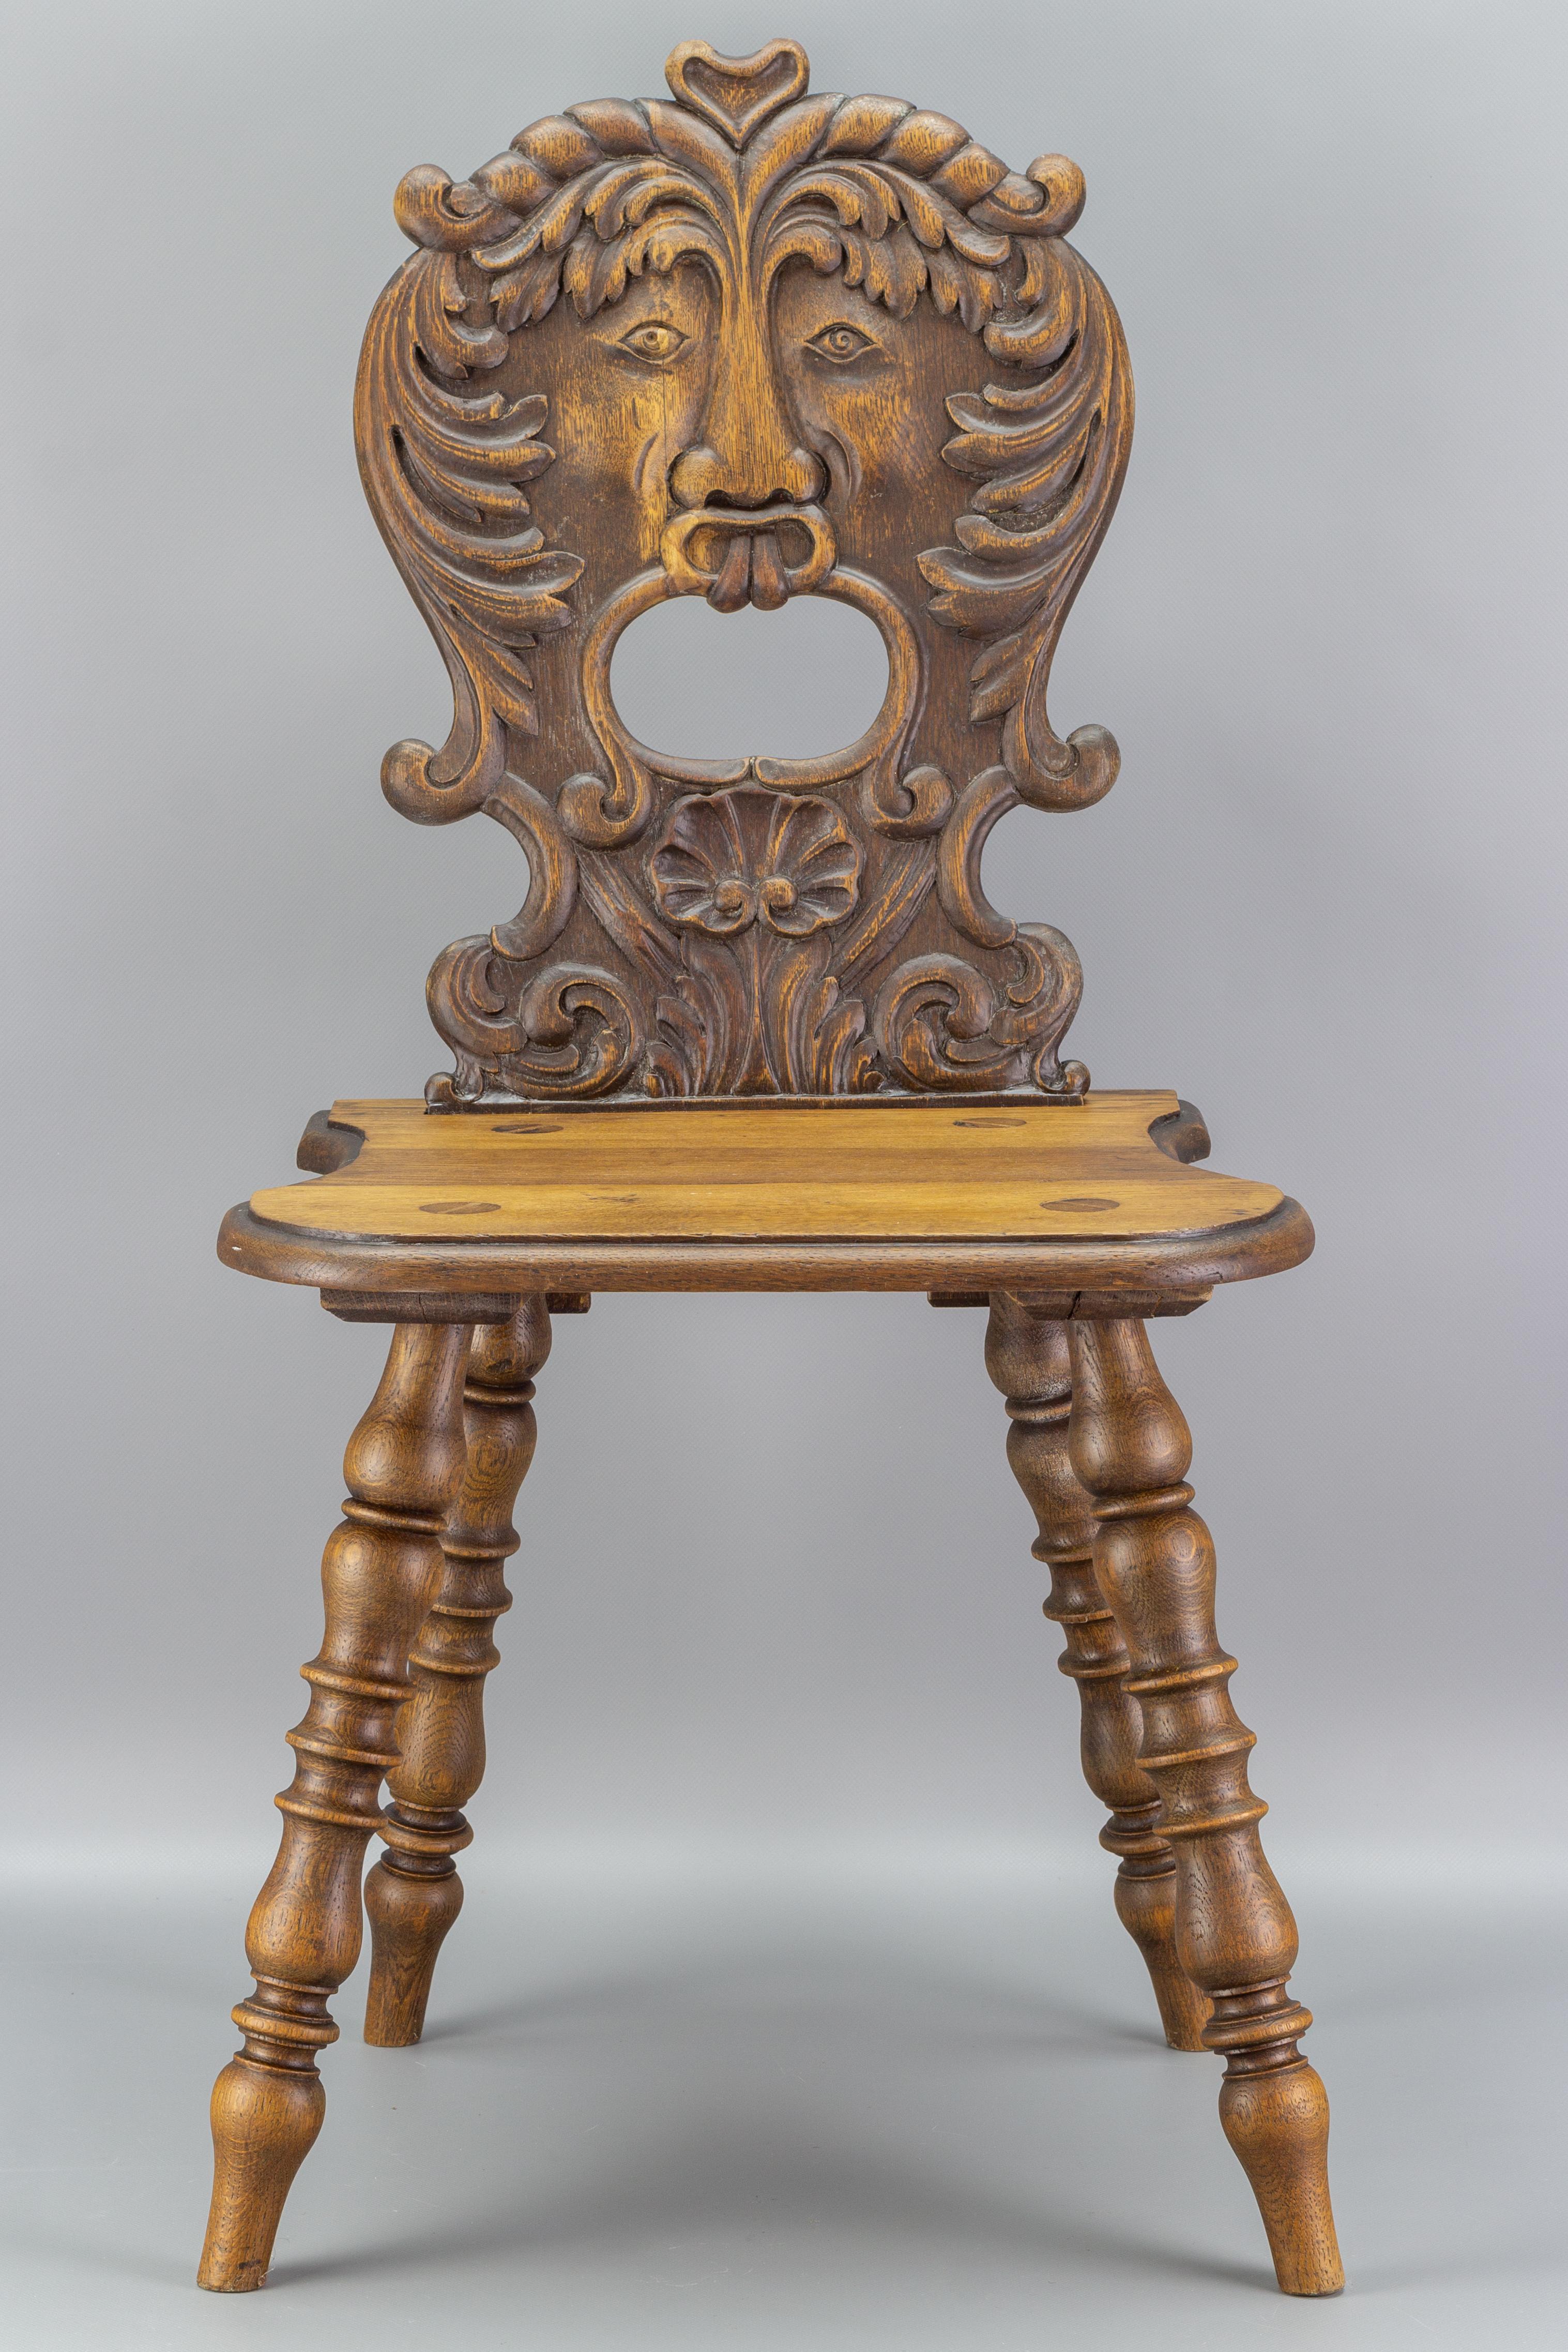 An exceptional carved oakwood peasant chair from the late 19th century. The backrest is highly decorative, adorned with a relief carving of a grotesque. Raised on turned legs.
Dimensions: height: 90 cm / 35.43 in; width: 47 cm / 18.5 in; depth: 42